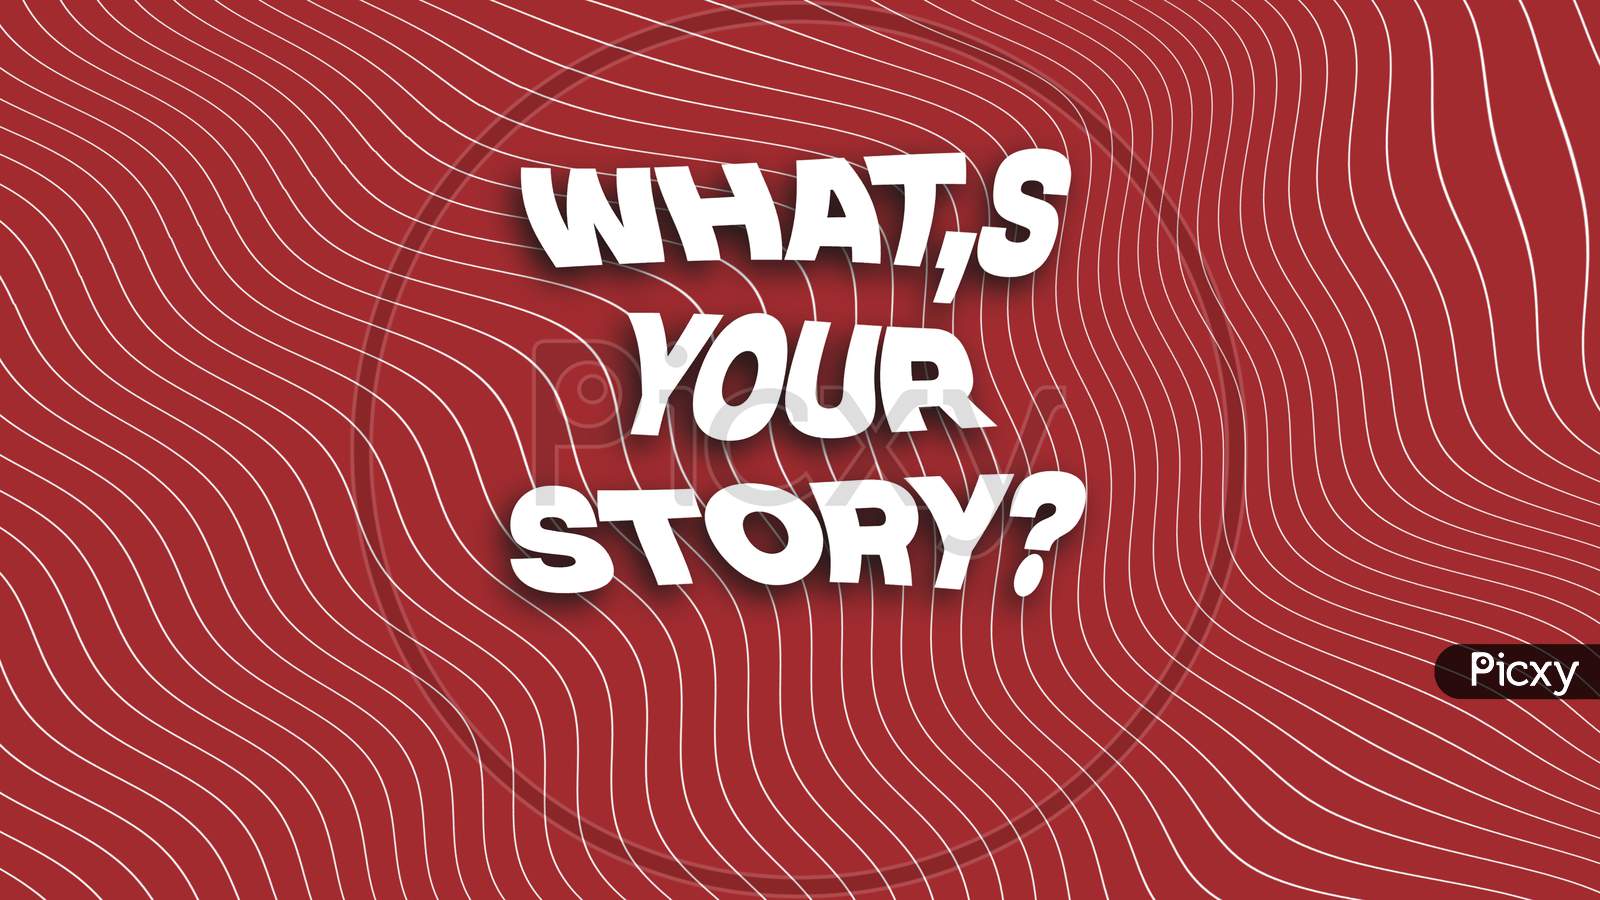 What'S Your Story? On Abstract Background